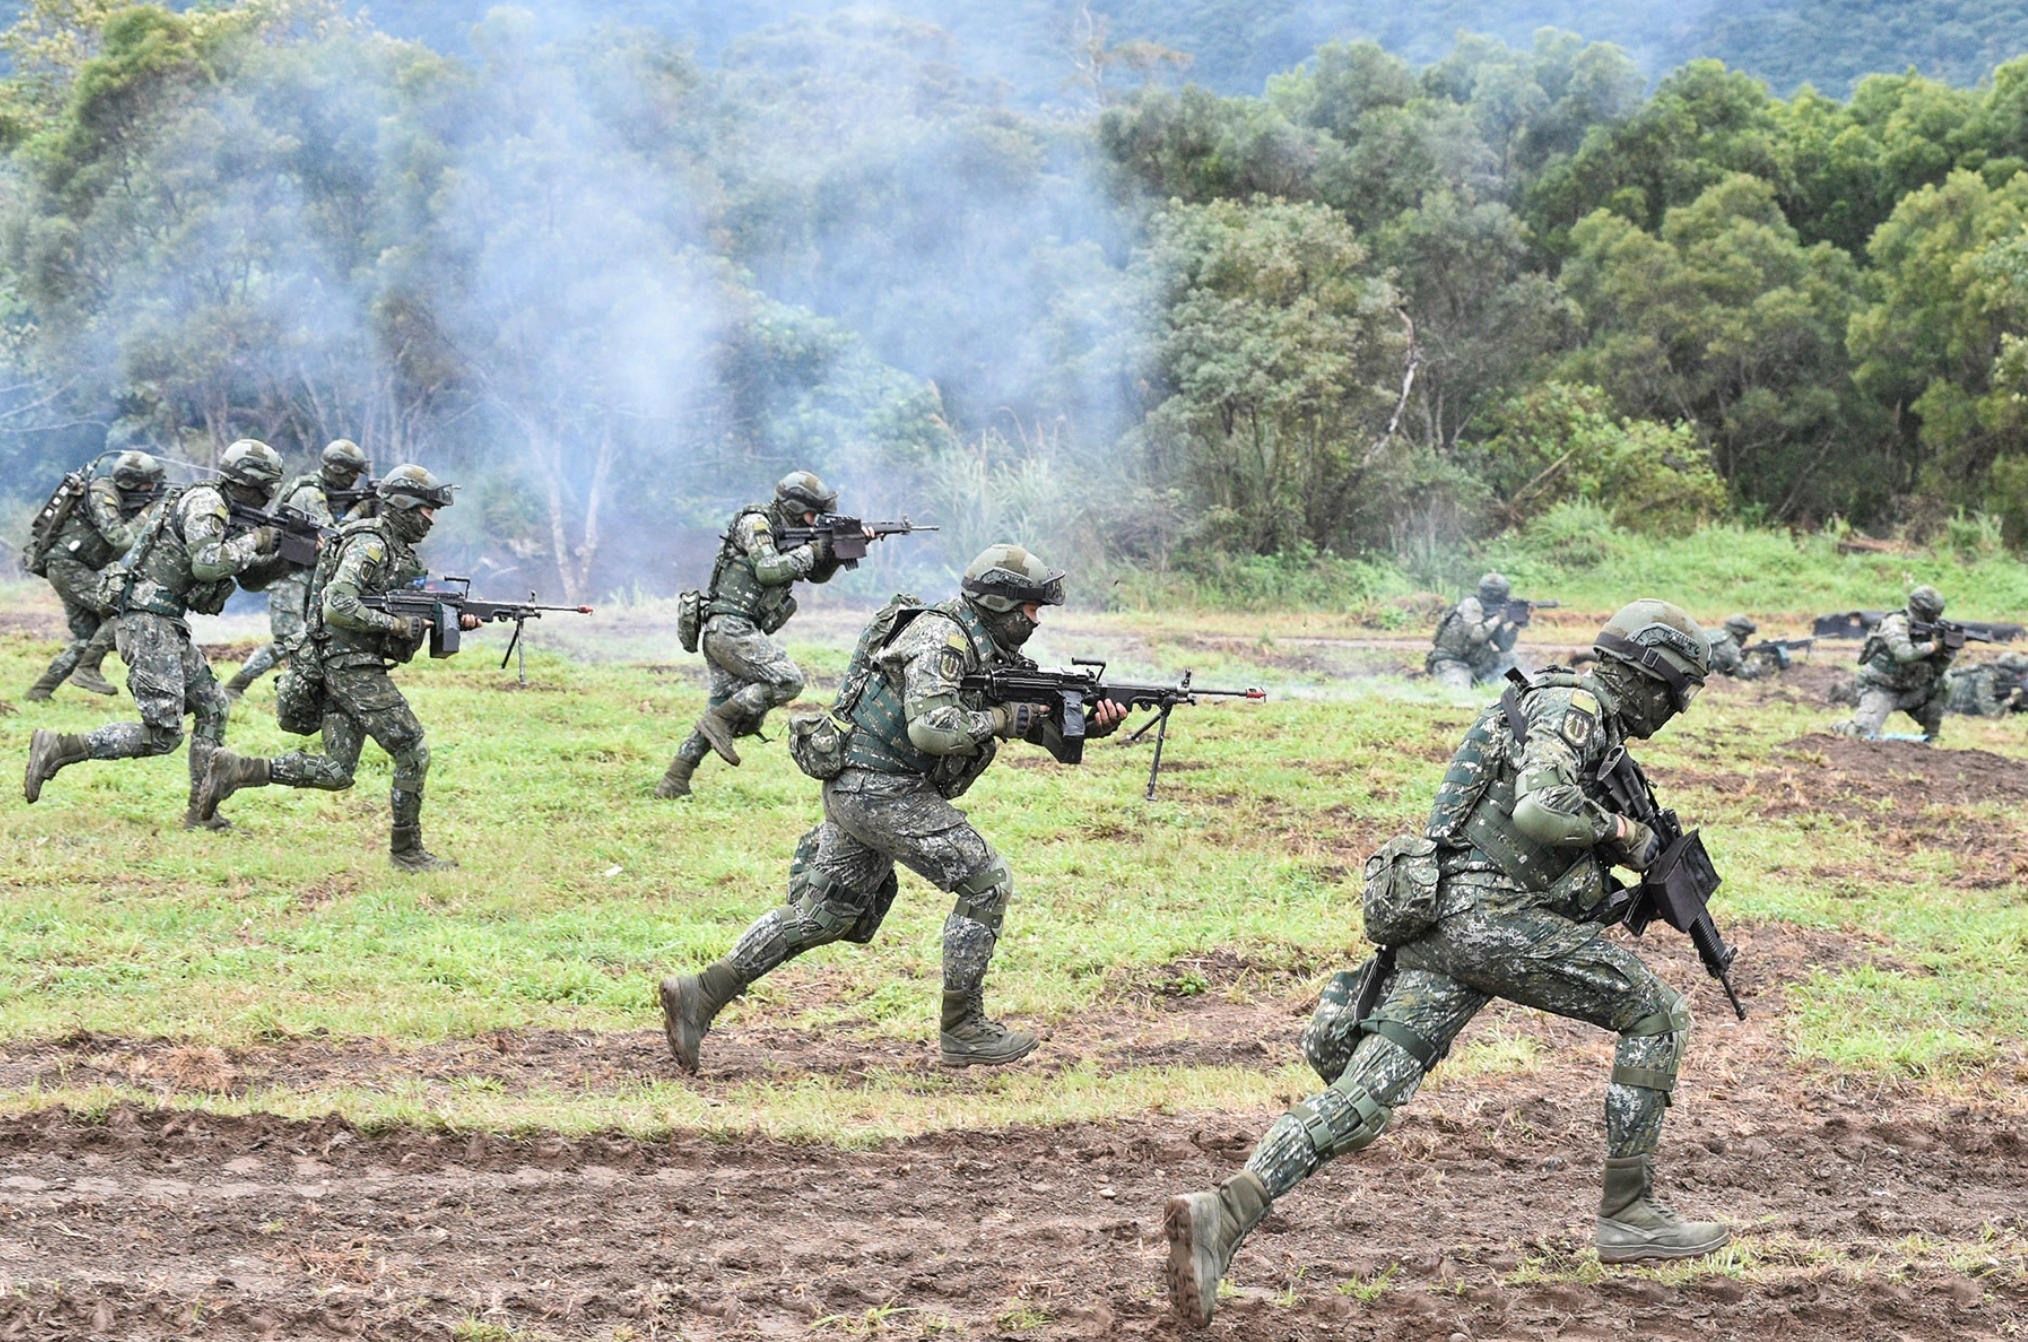 Taiwanese soldiers simulate fending off an attempted invasion